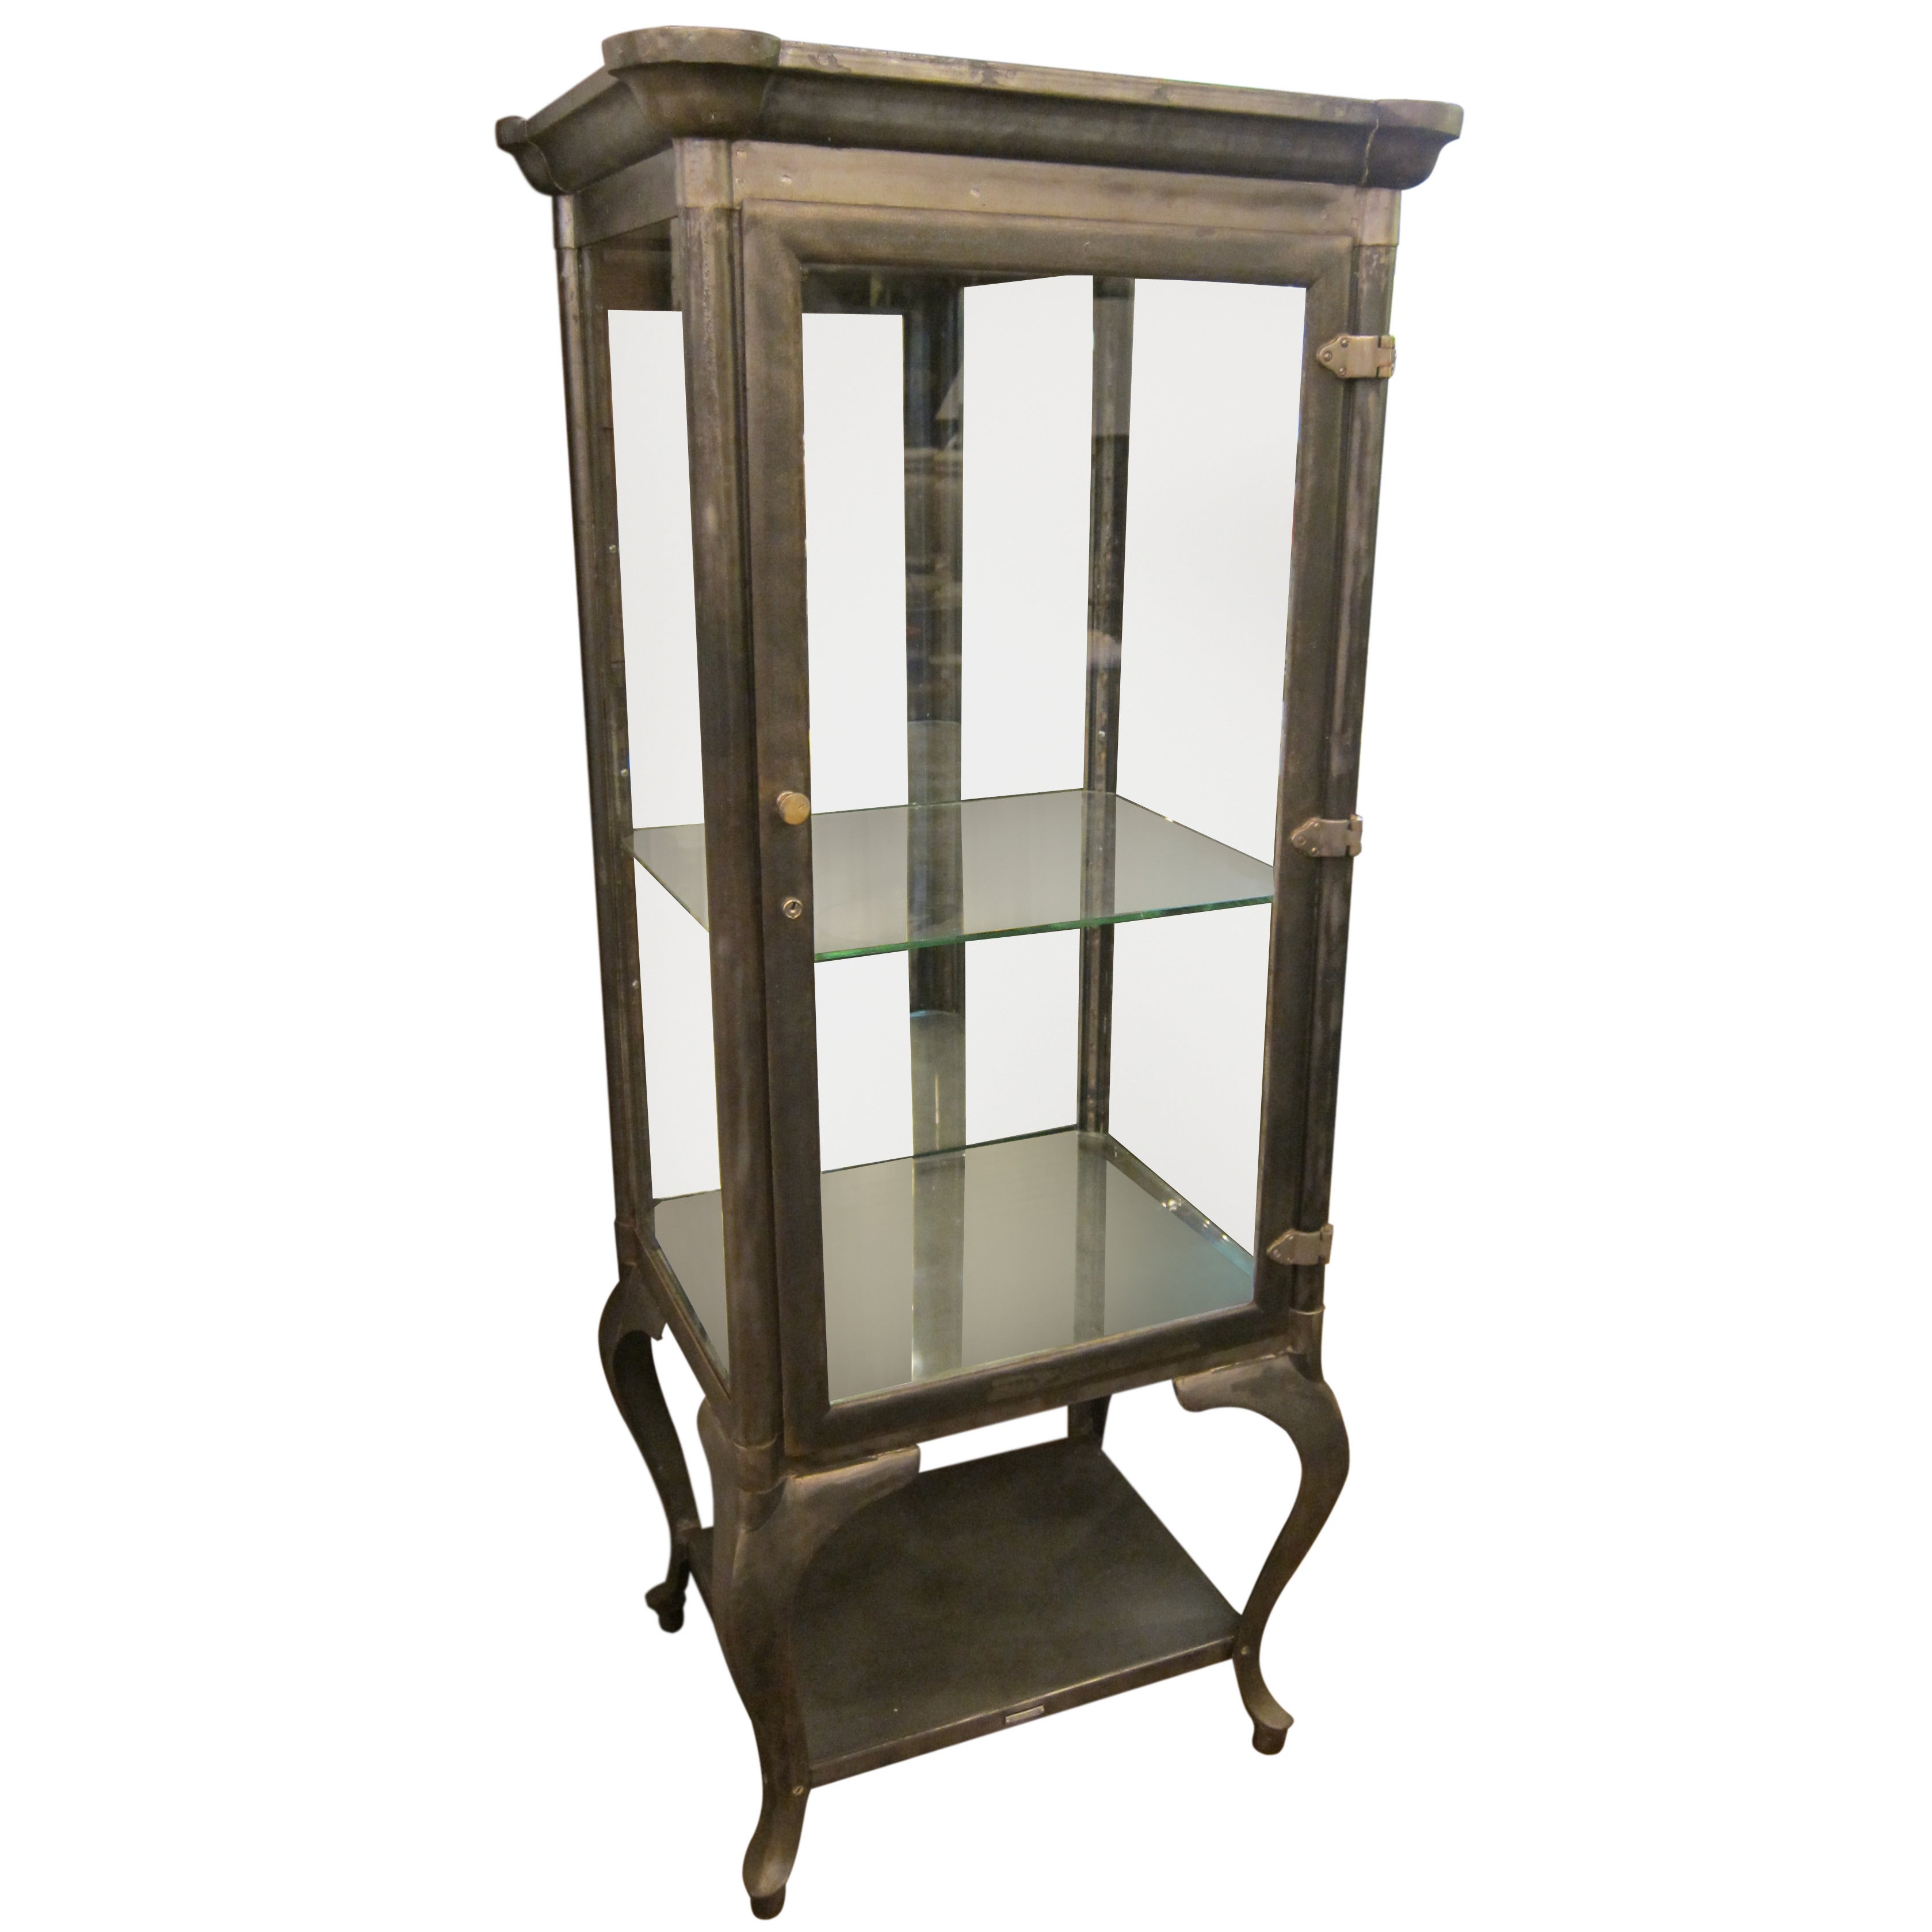 1907 Stripped Steel Dental Cabinet with Mirrored Backpanel and Glass Shelves